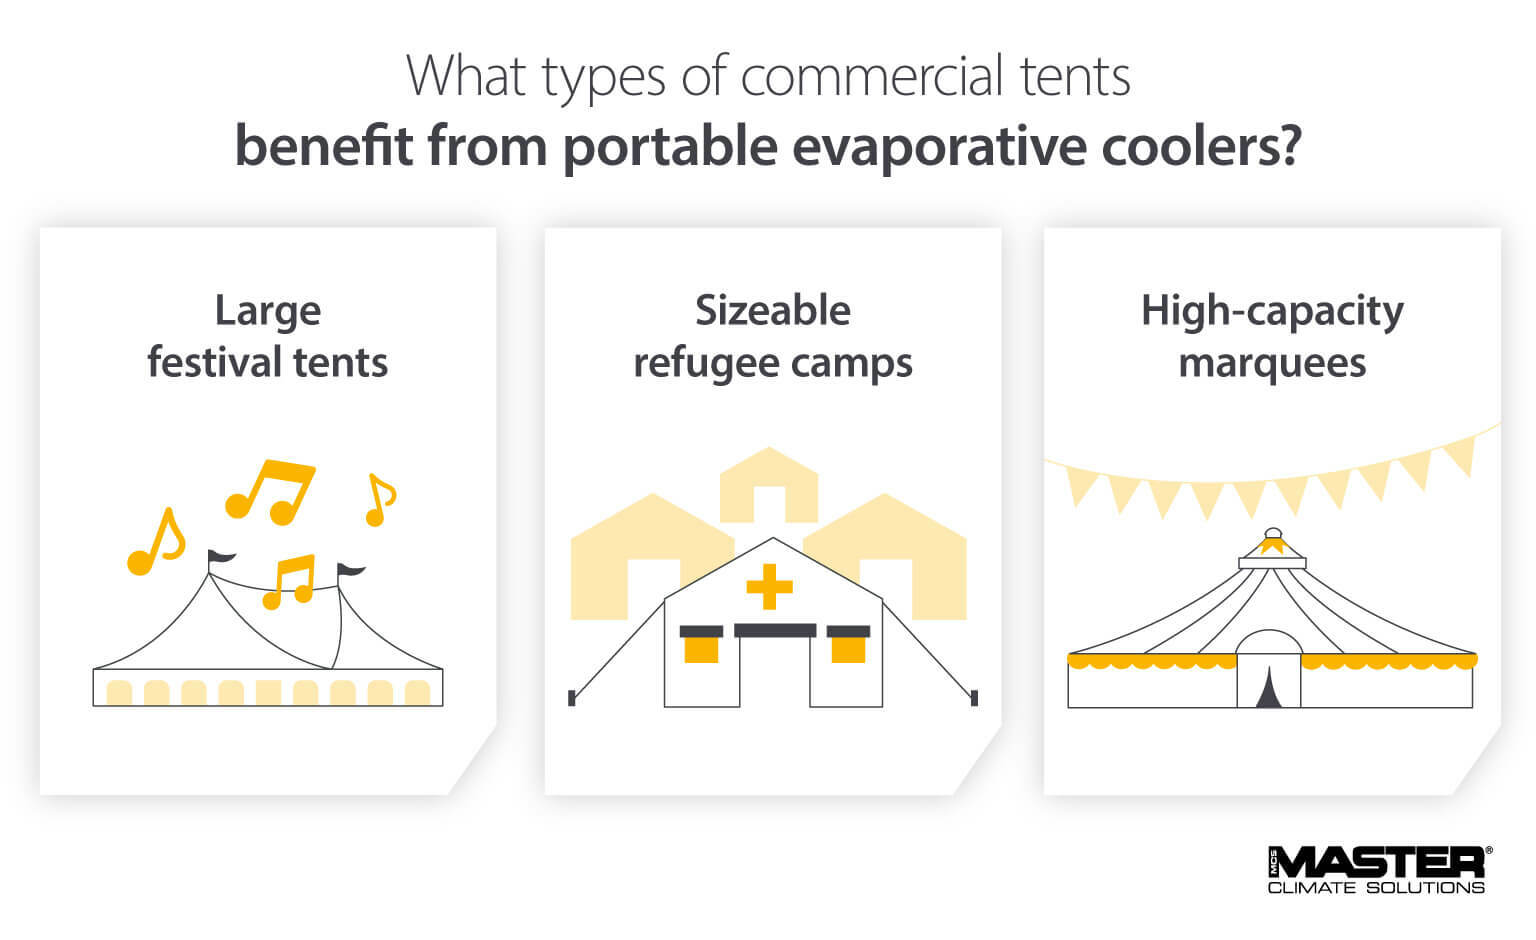 Infographic: Benefits of using portable evaporative coolers for large festival tents, refugee camps, and high-capacity marquees